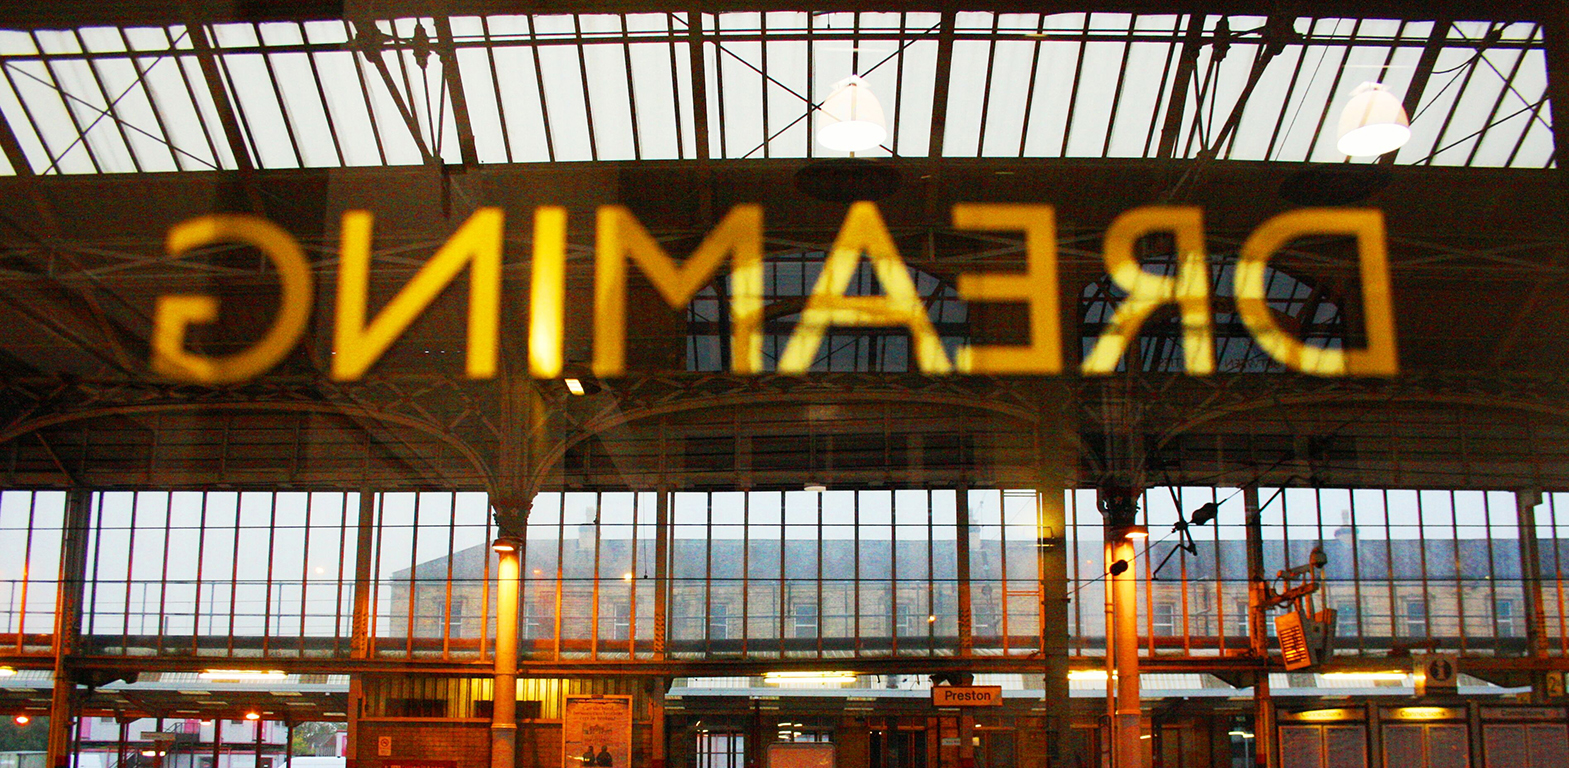 Letters on the windows of the waiting rooms of Preston train station as part of an artwork by Lisa Wigham. The word is 'dreaming'.